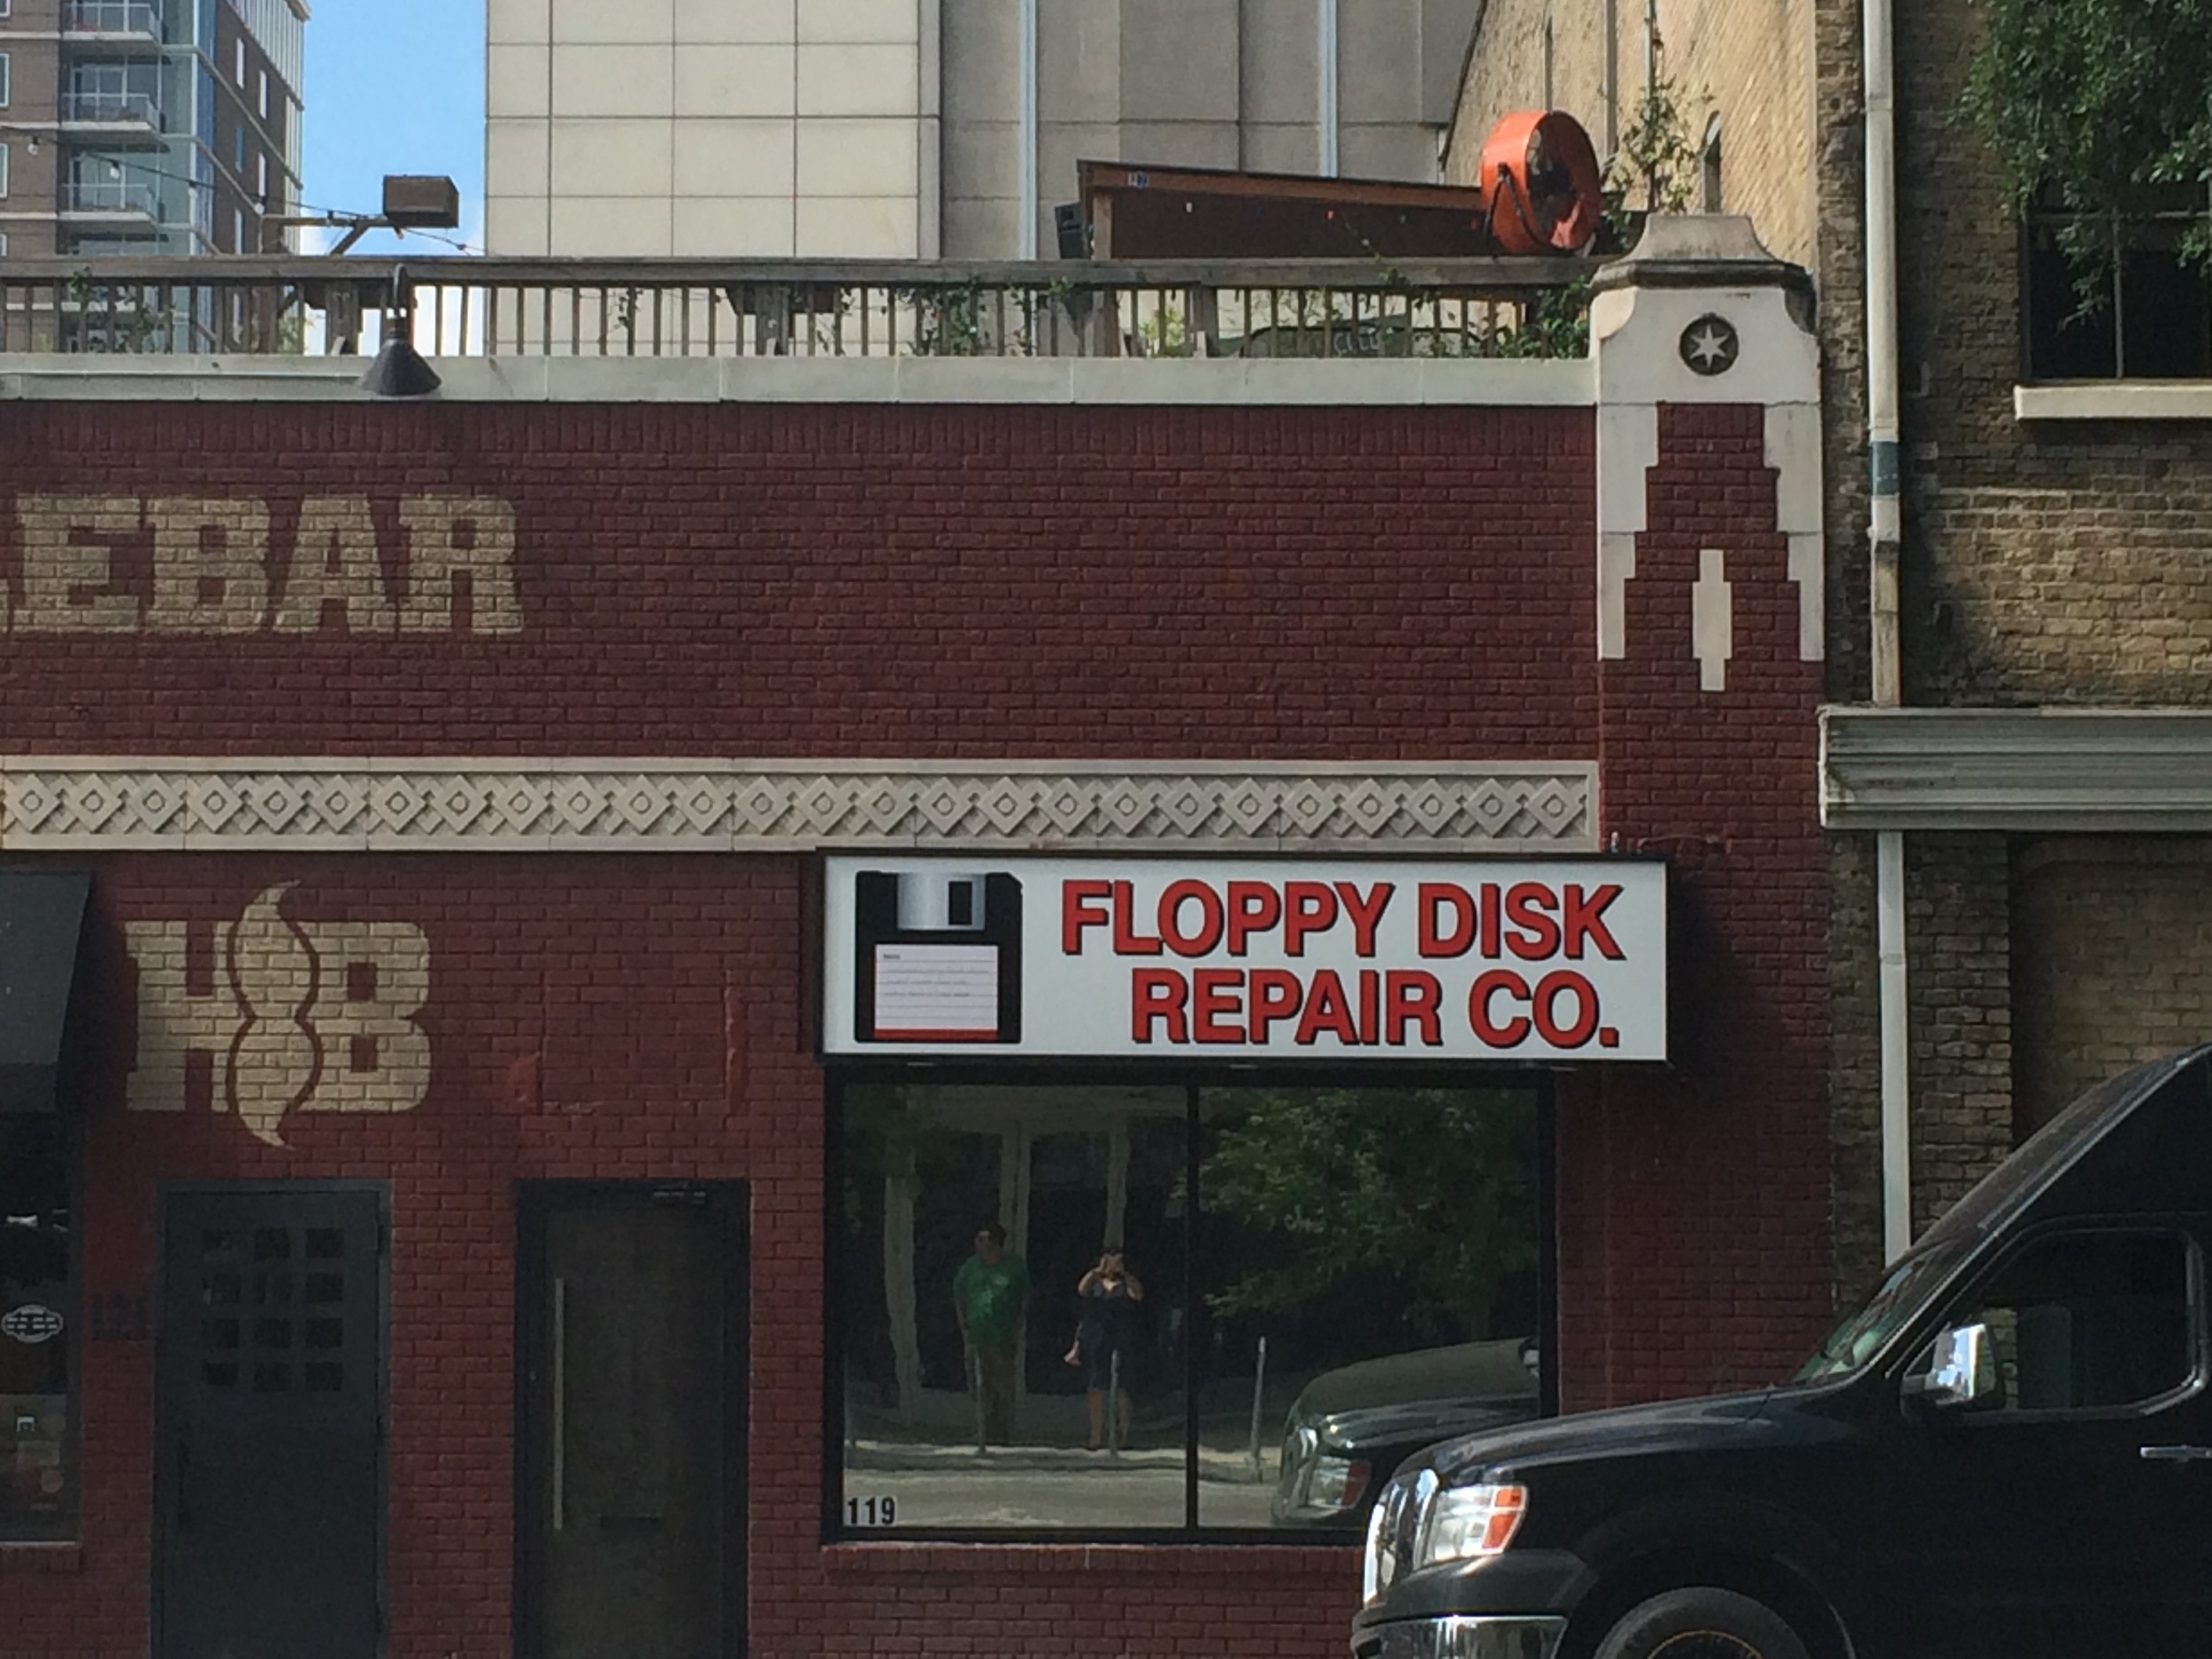 I need my floppy disk repaired. Obviously.